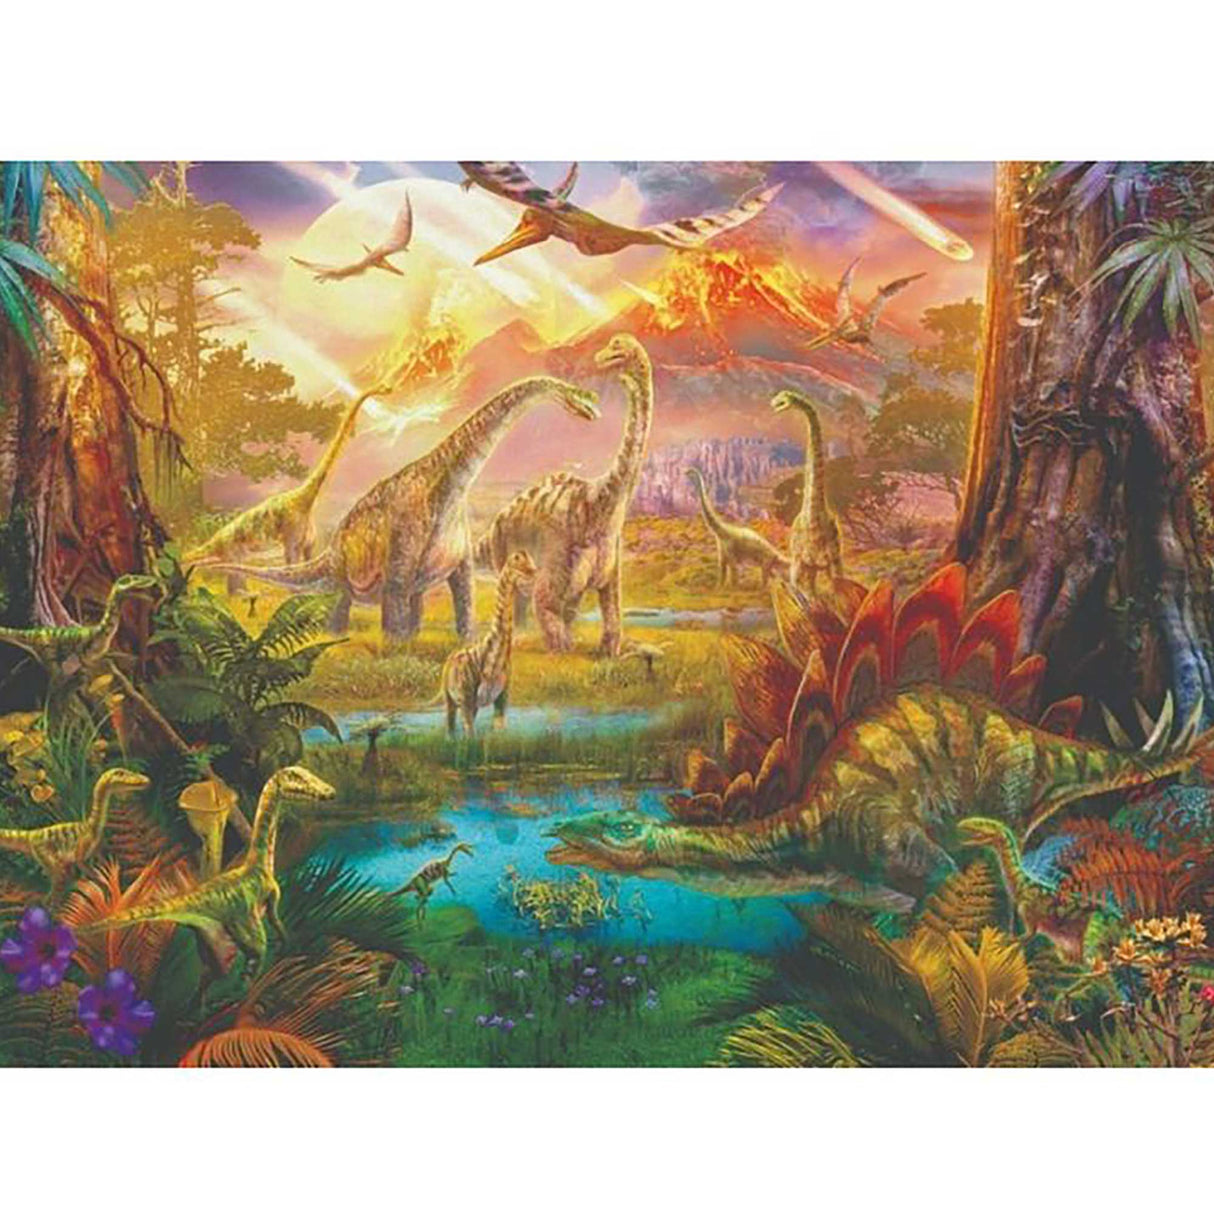 Ravensburger Land of The Dinosaurs Puzzle (500 pieces)